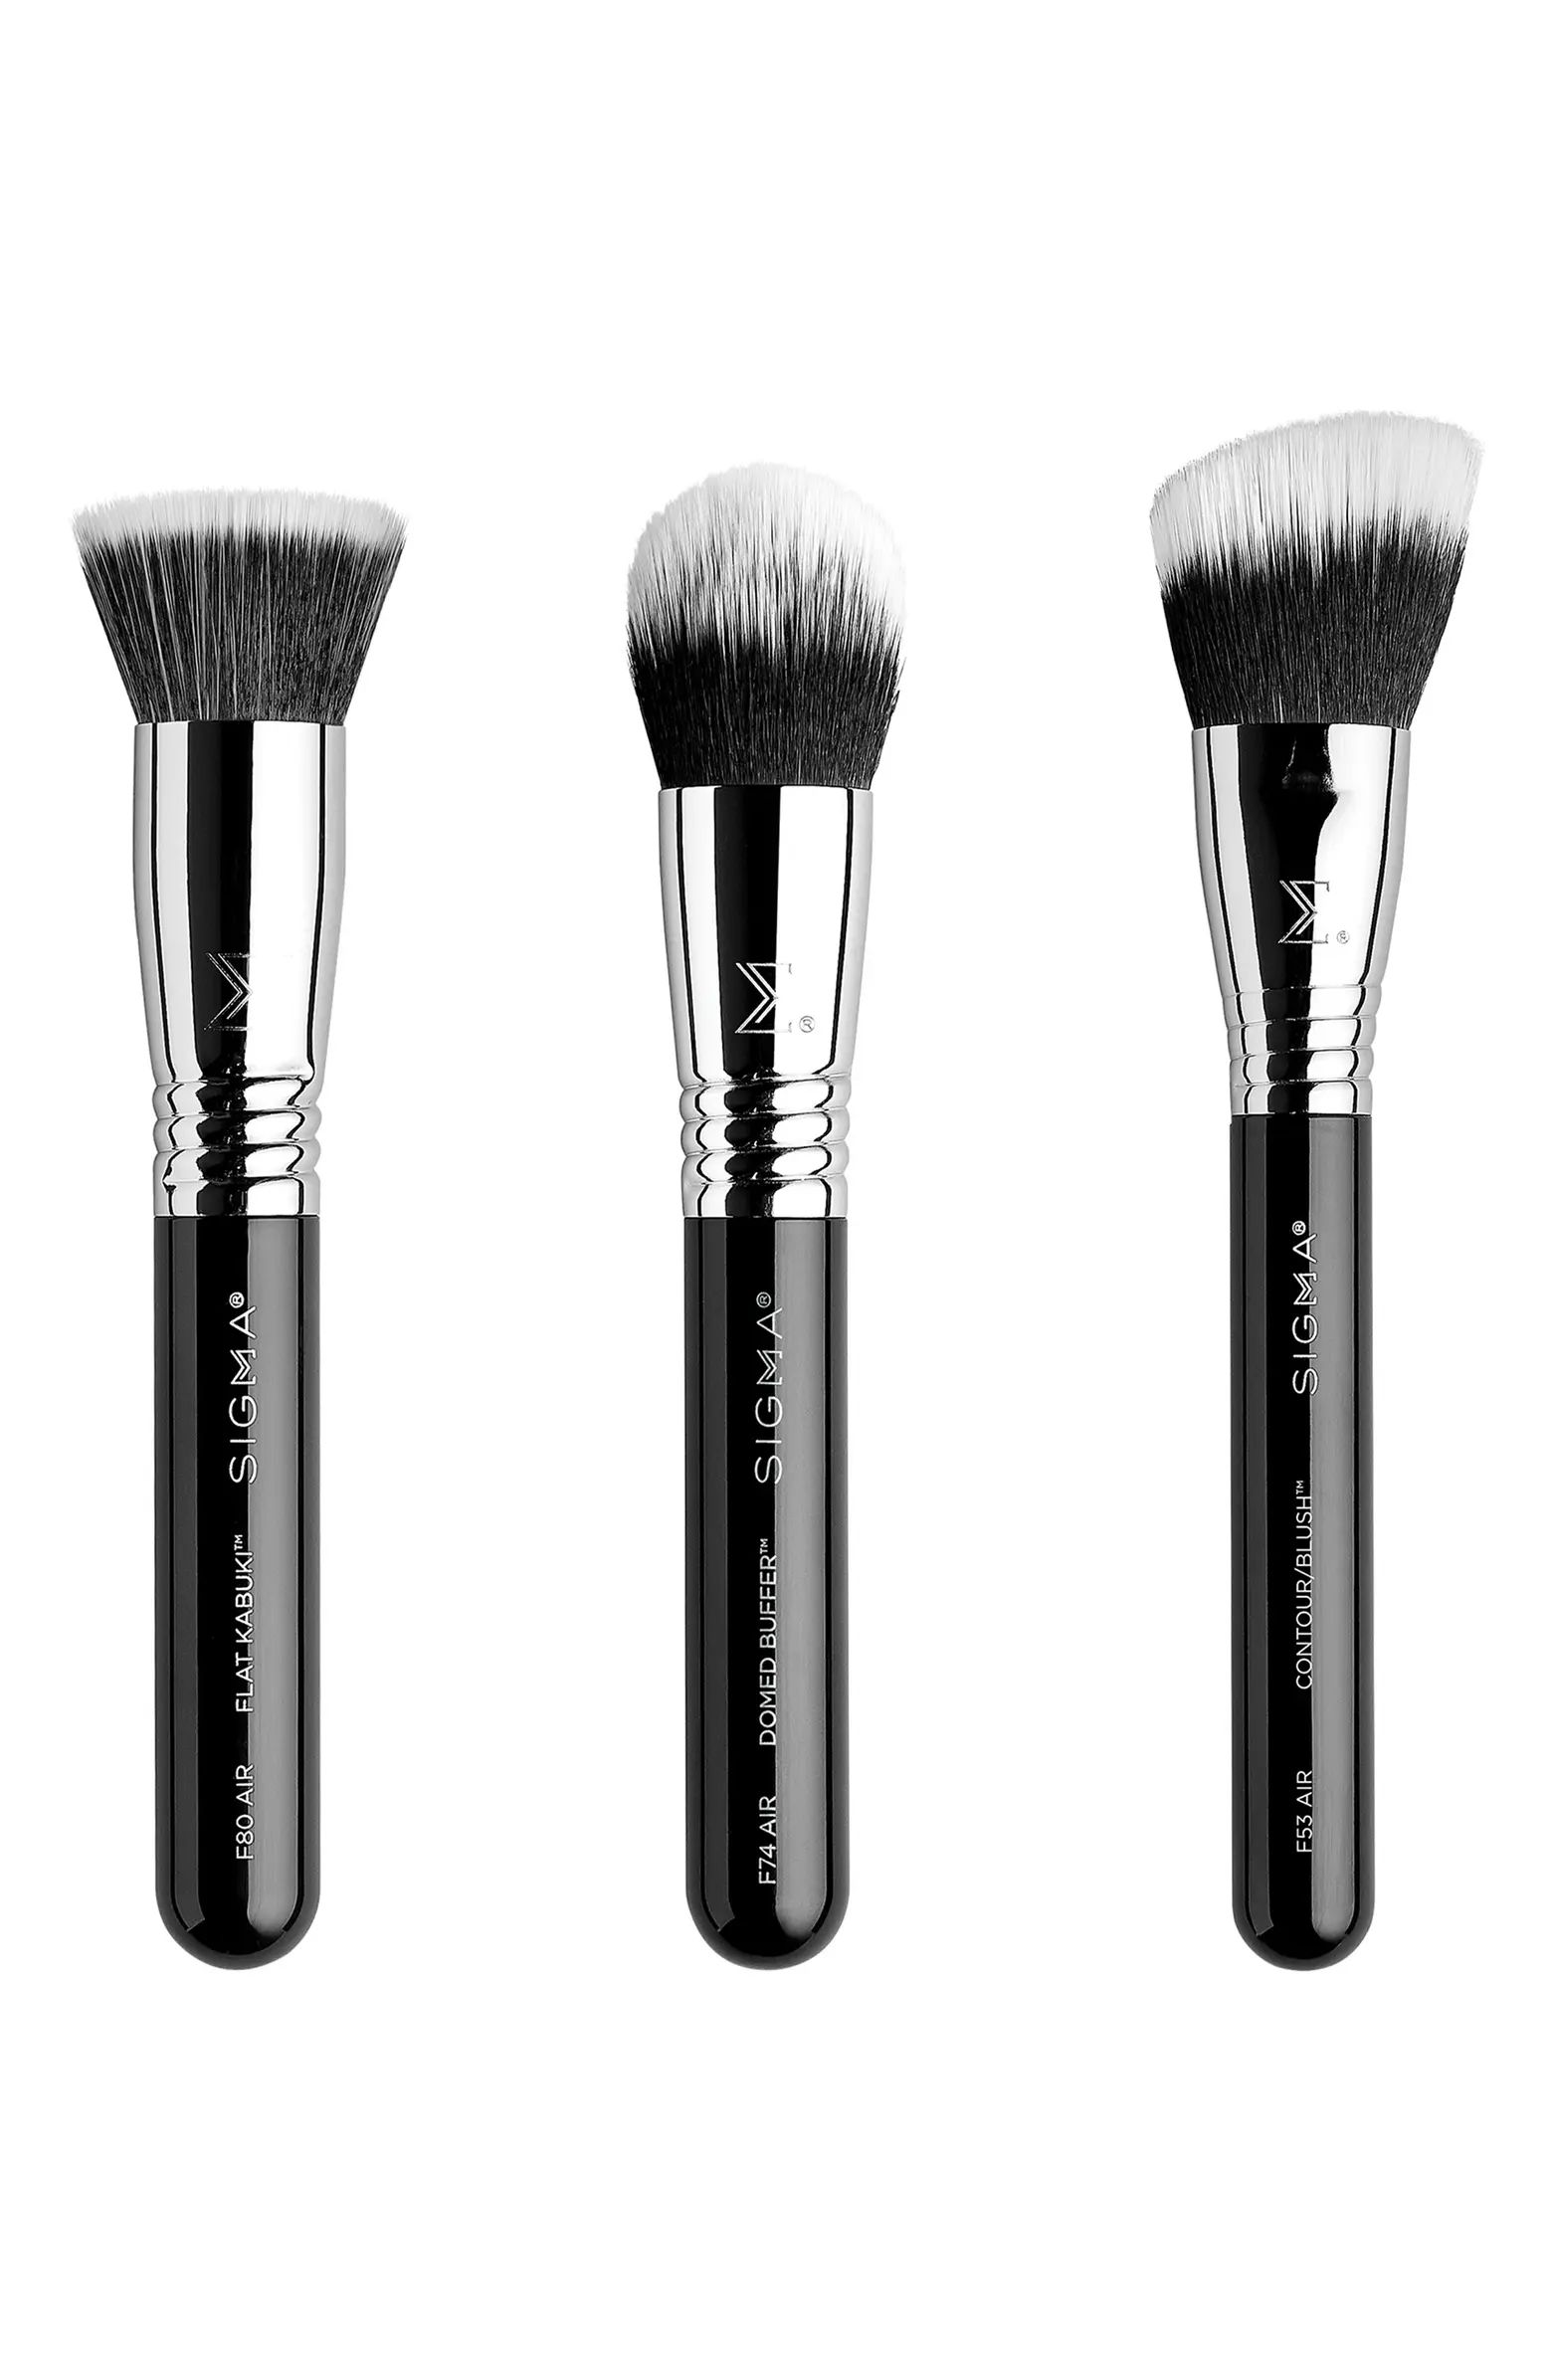 All About Face Makeup Brush Trio Set $76 Value | Nordstrom